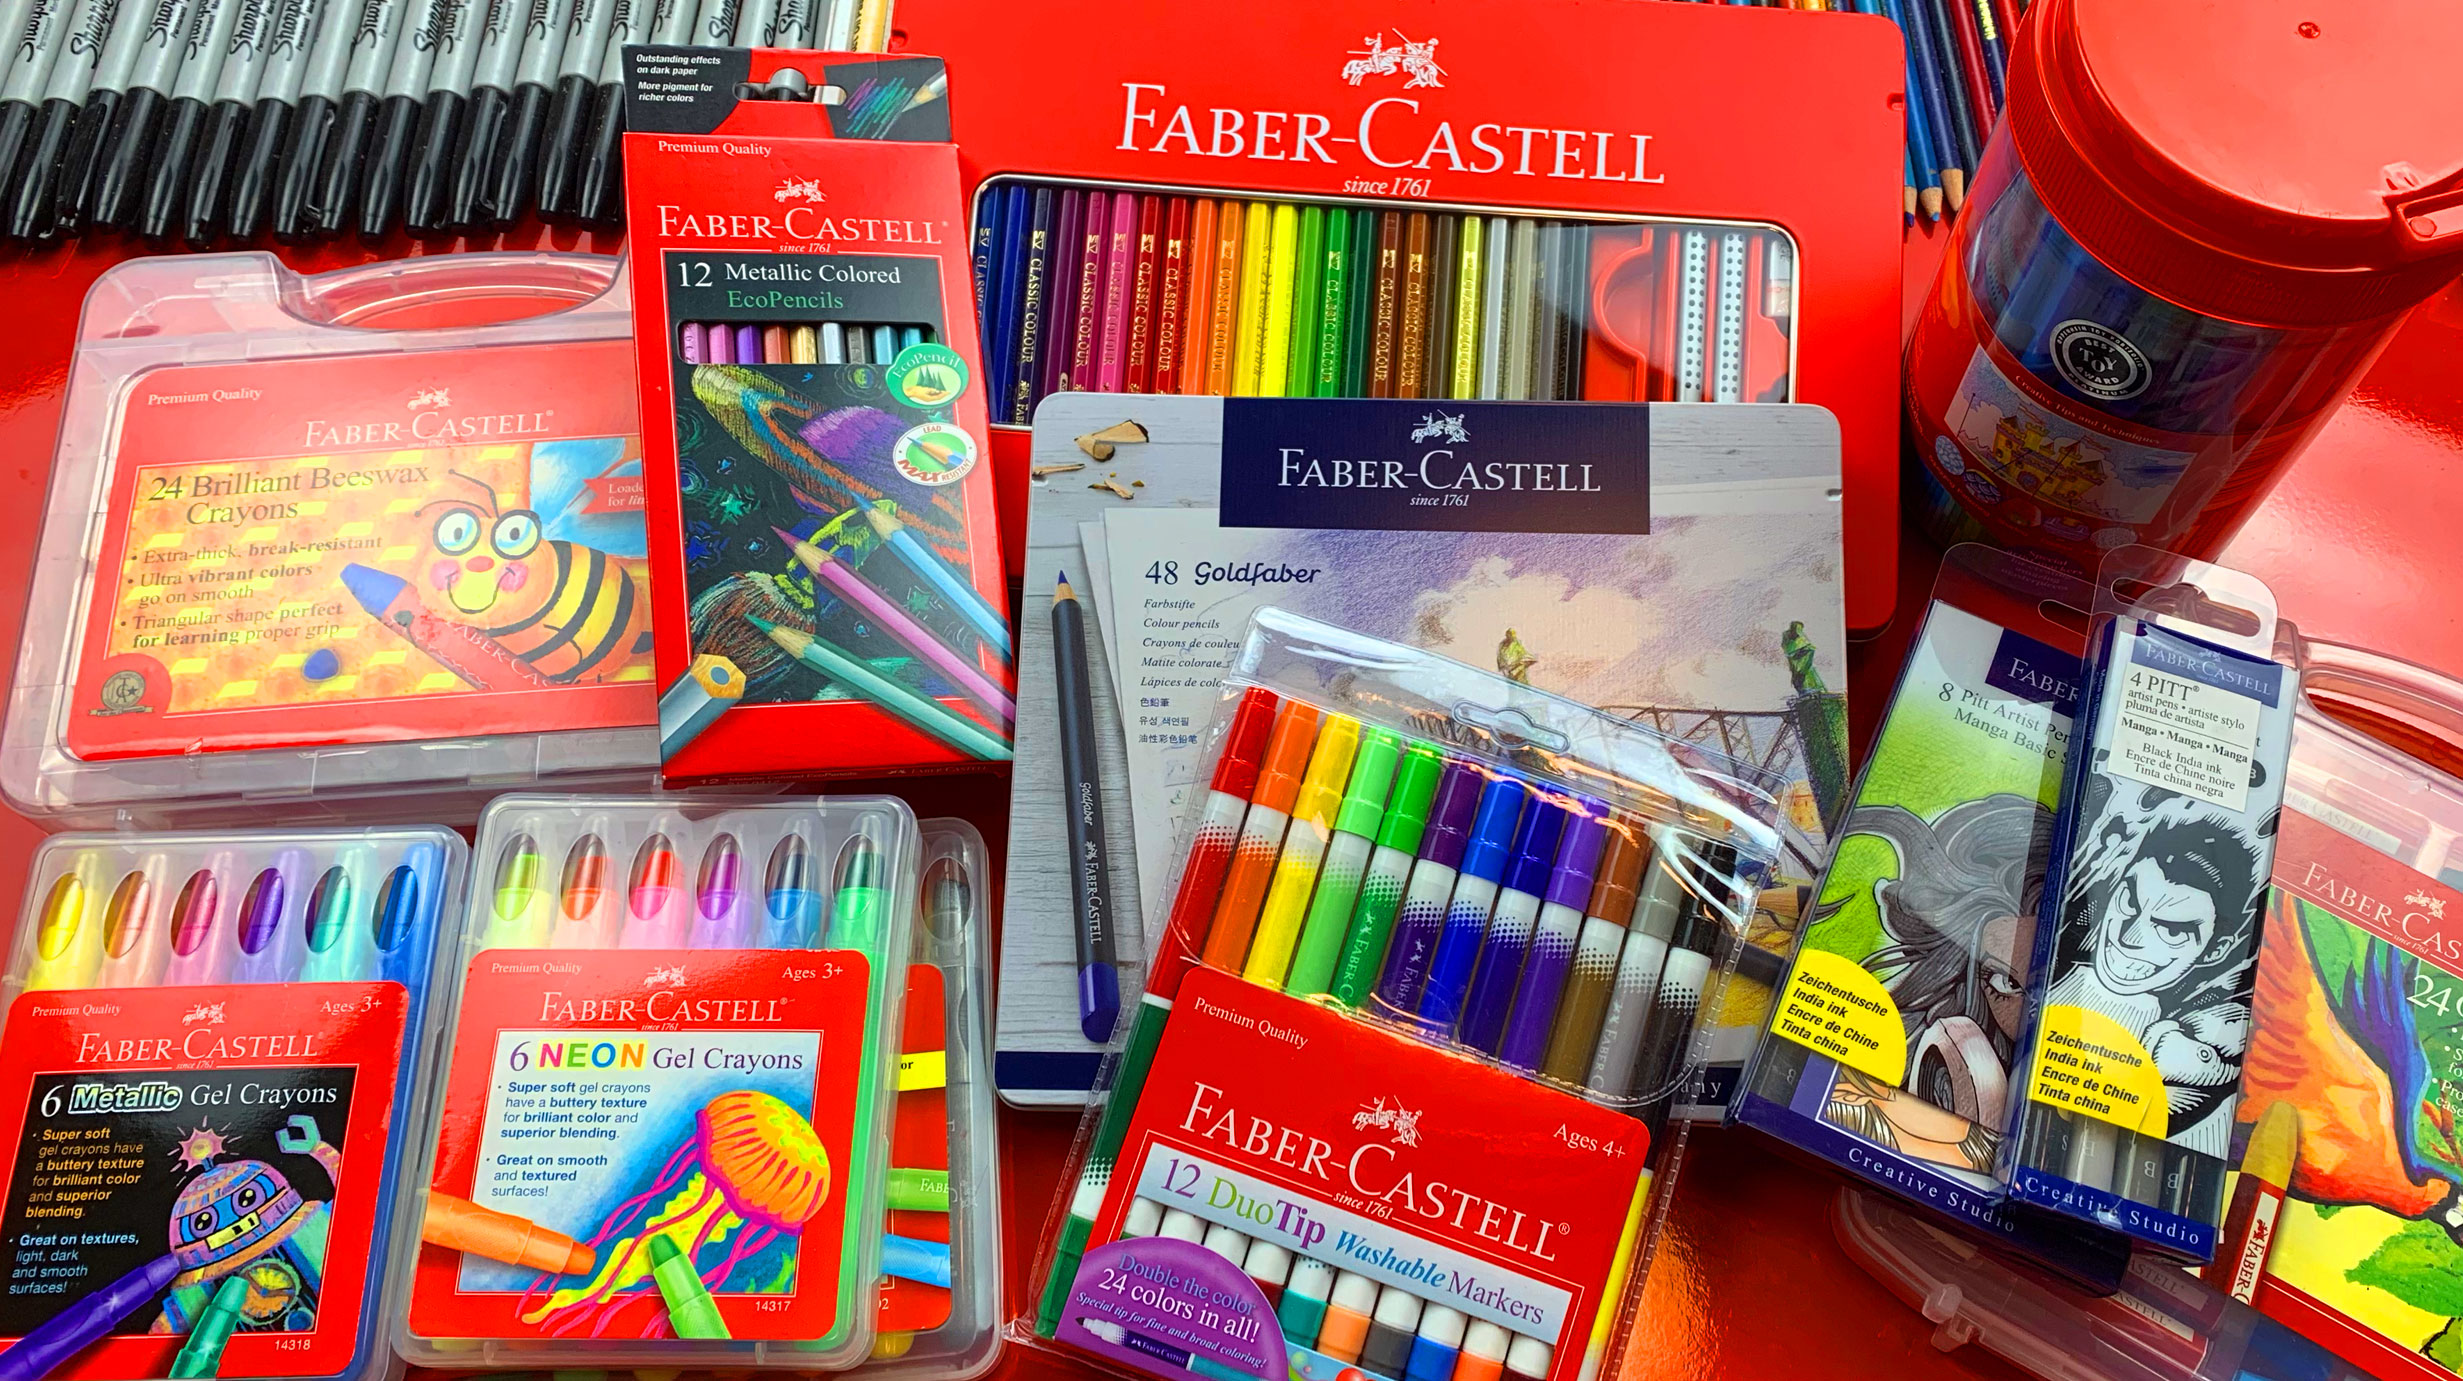 Faber-Castell Metallic Colored EcoPencils School Pack of 240